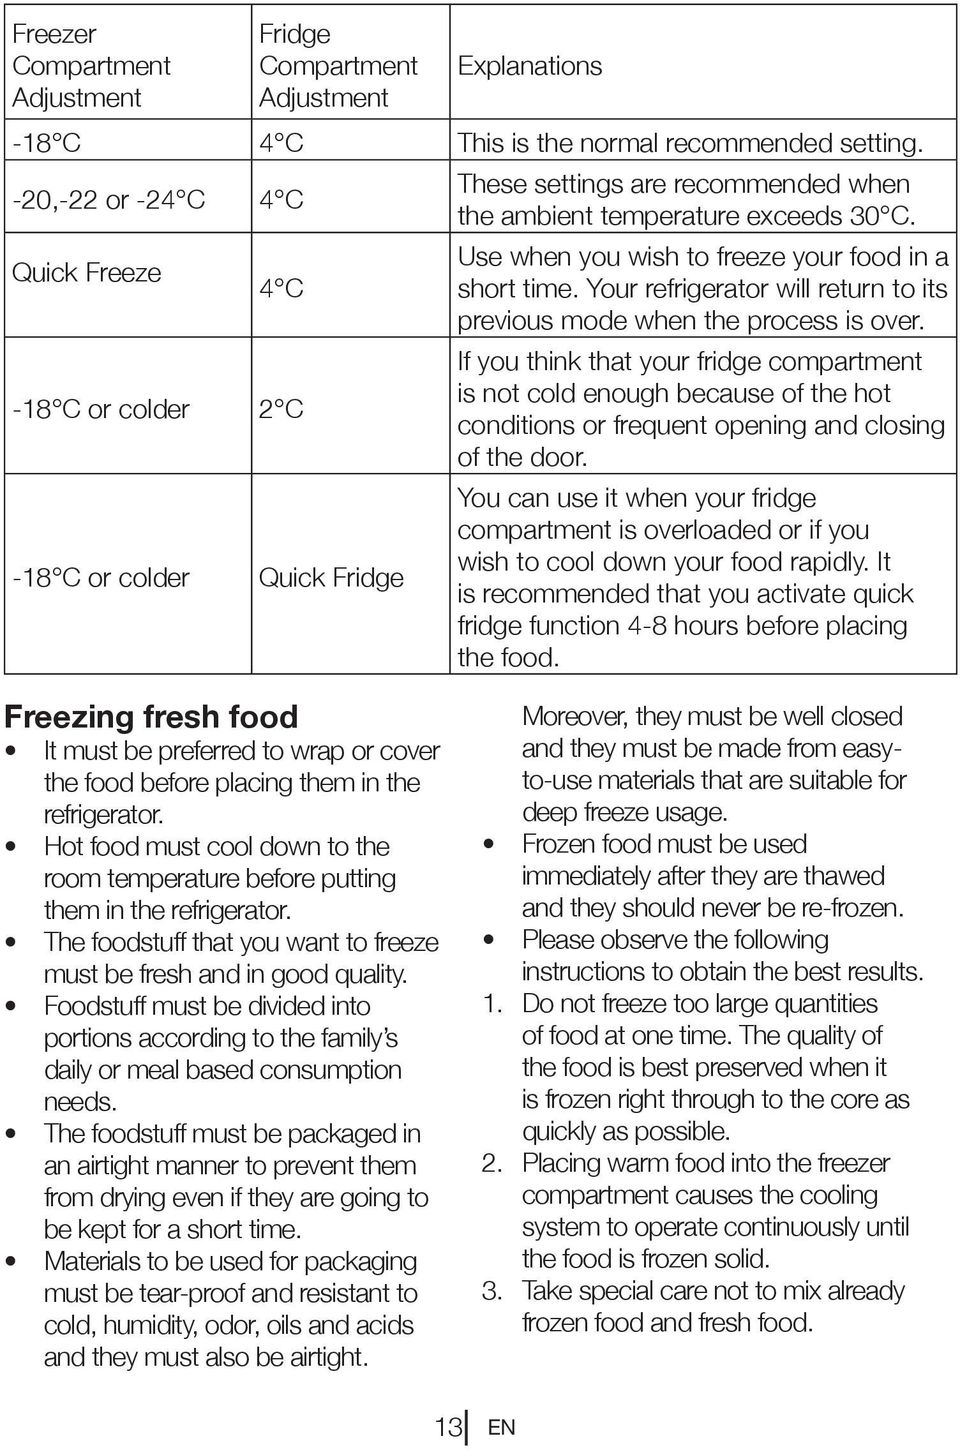 Use when you wish to freeze your food in a short time. Your refrigerator will return to its previous mode when the process is over.